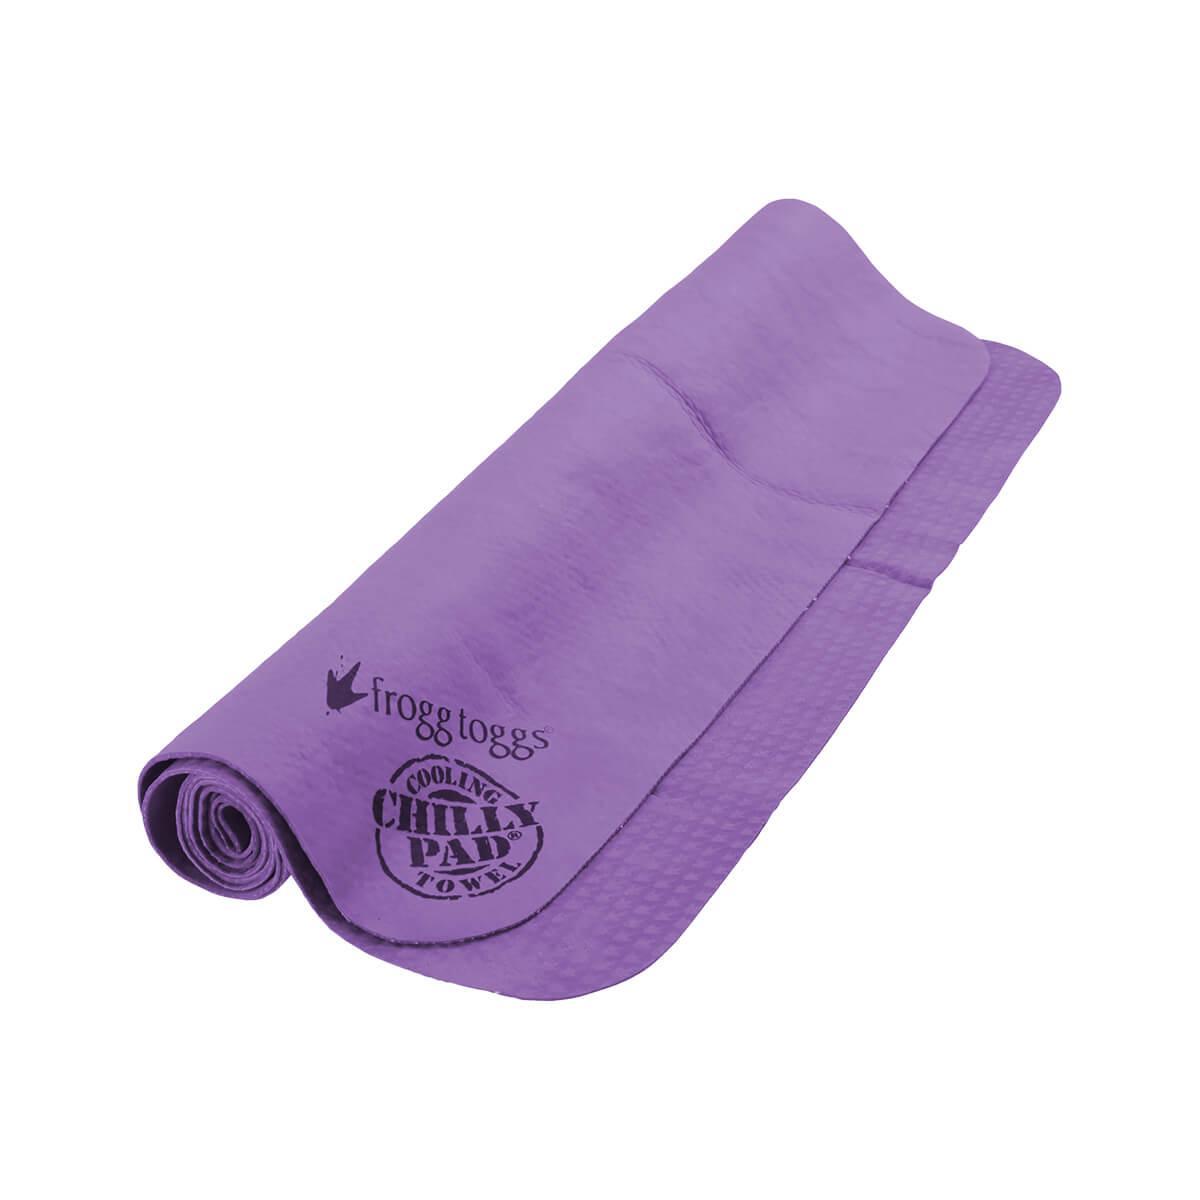  Chilly Pad Cooling Towel